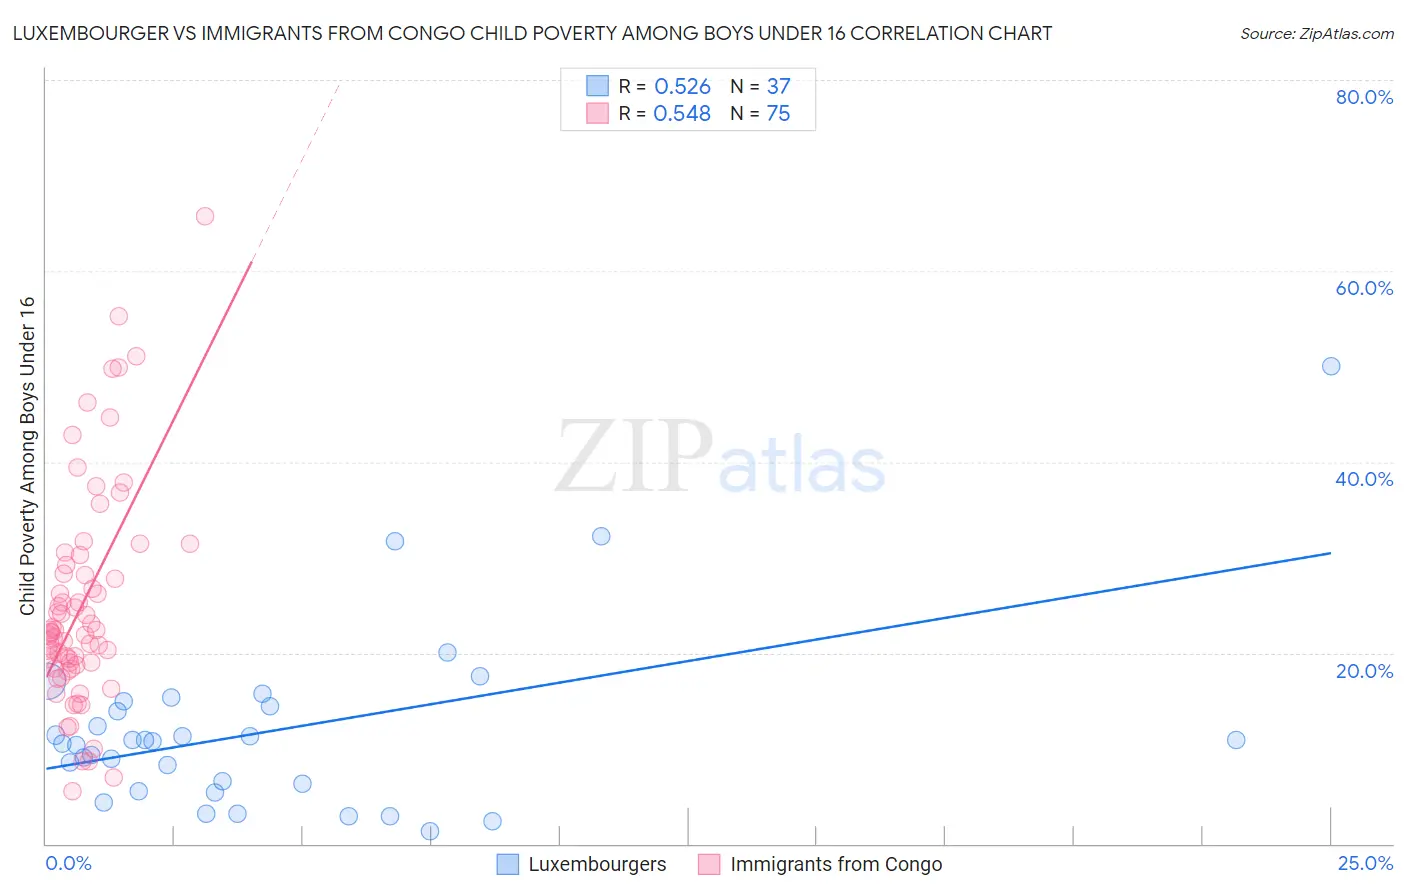 Luxembourger vs Immigrants from Congo Child Poverty Among Boys Under 16